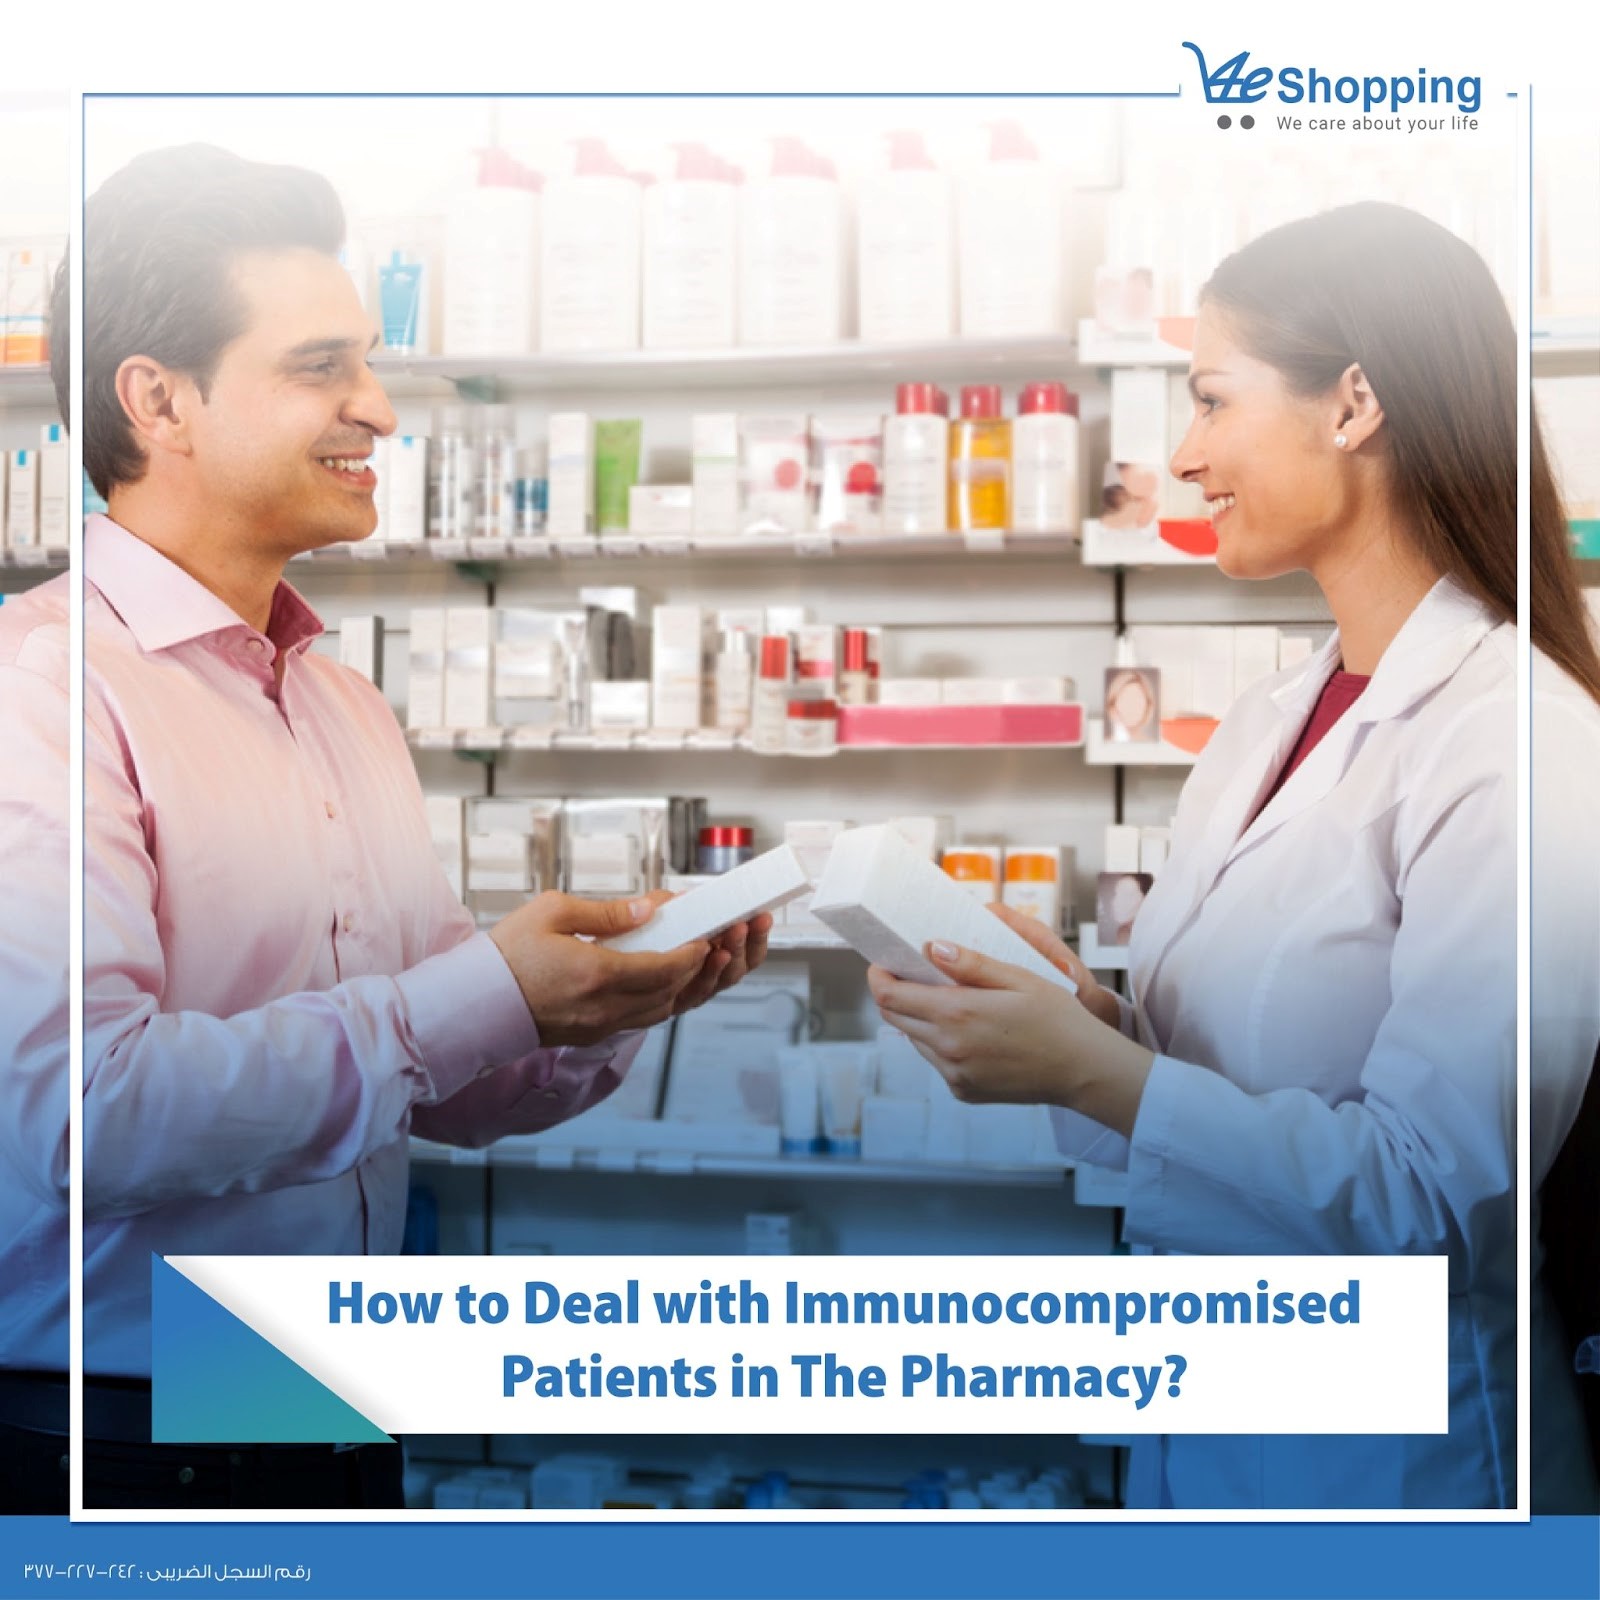 How to deal with immunocompromised patients in the pharmacy?